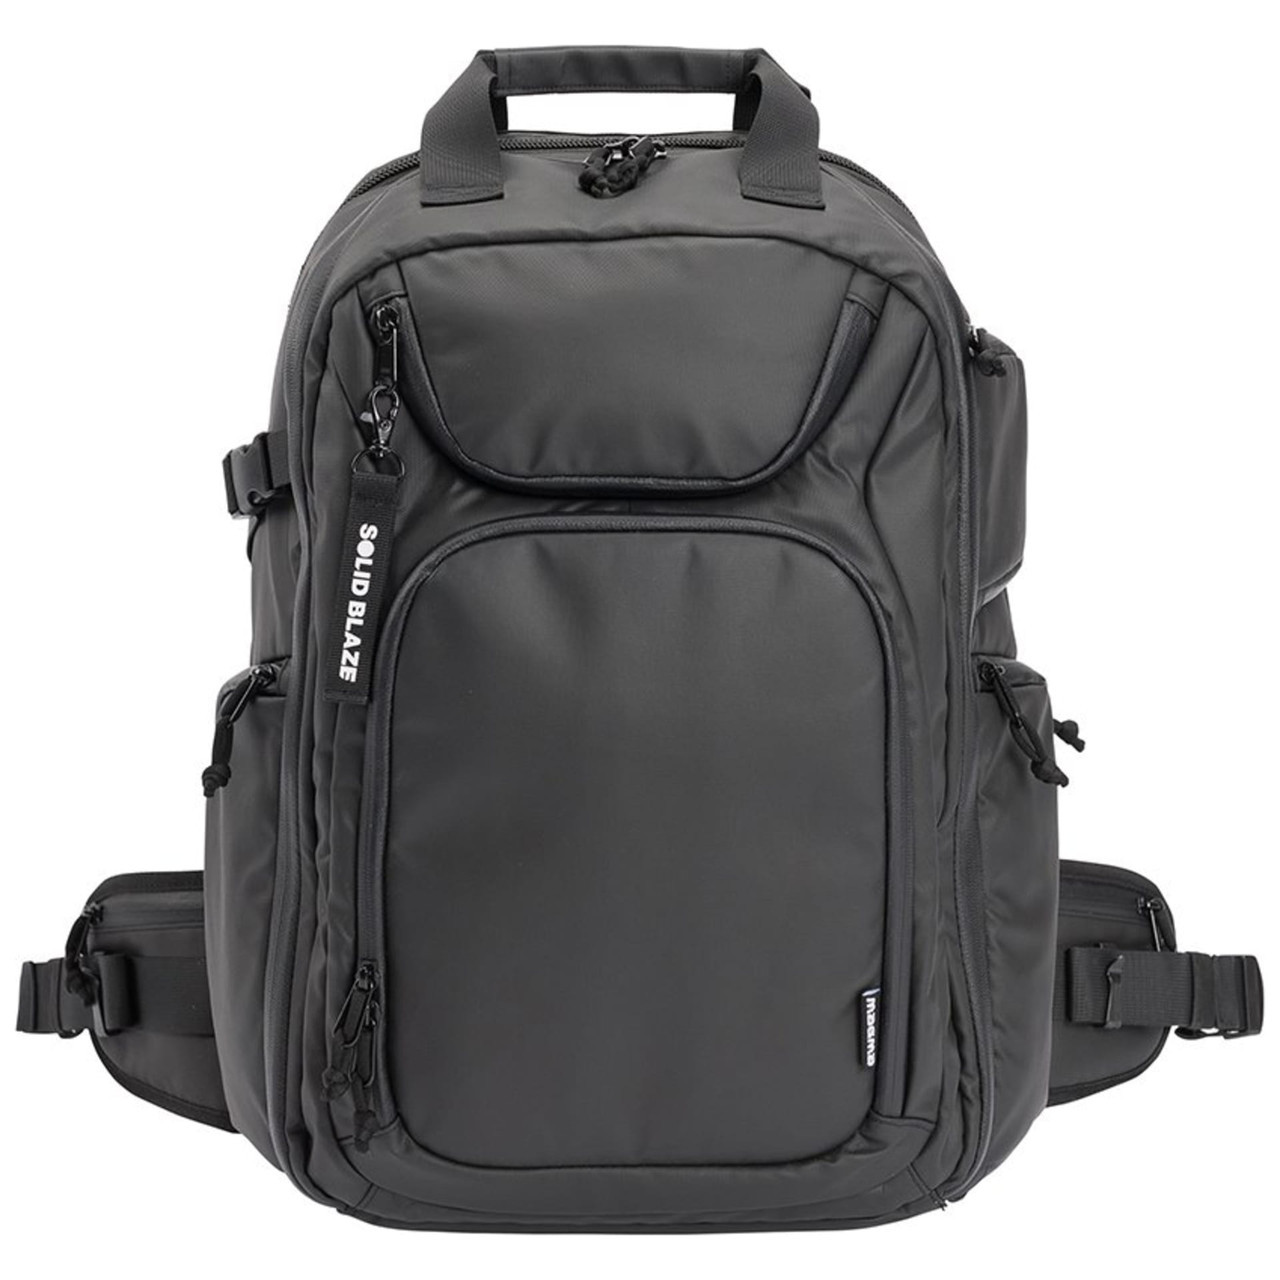 Circuit 5L Backpack, Bags Latest Styles